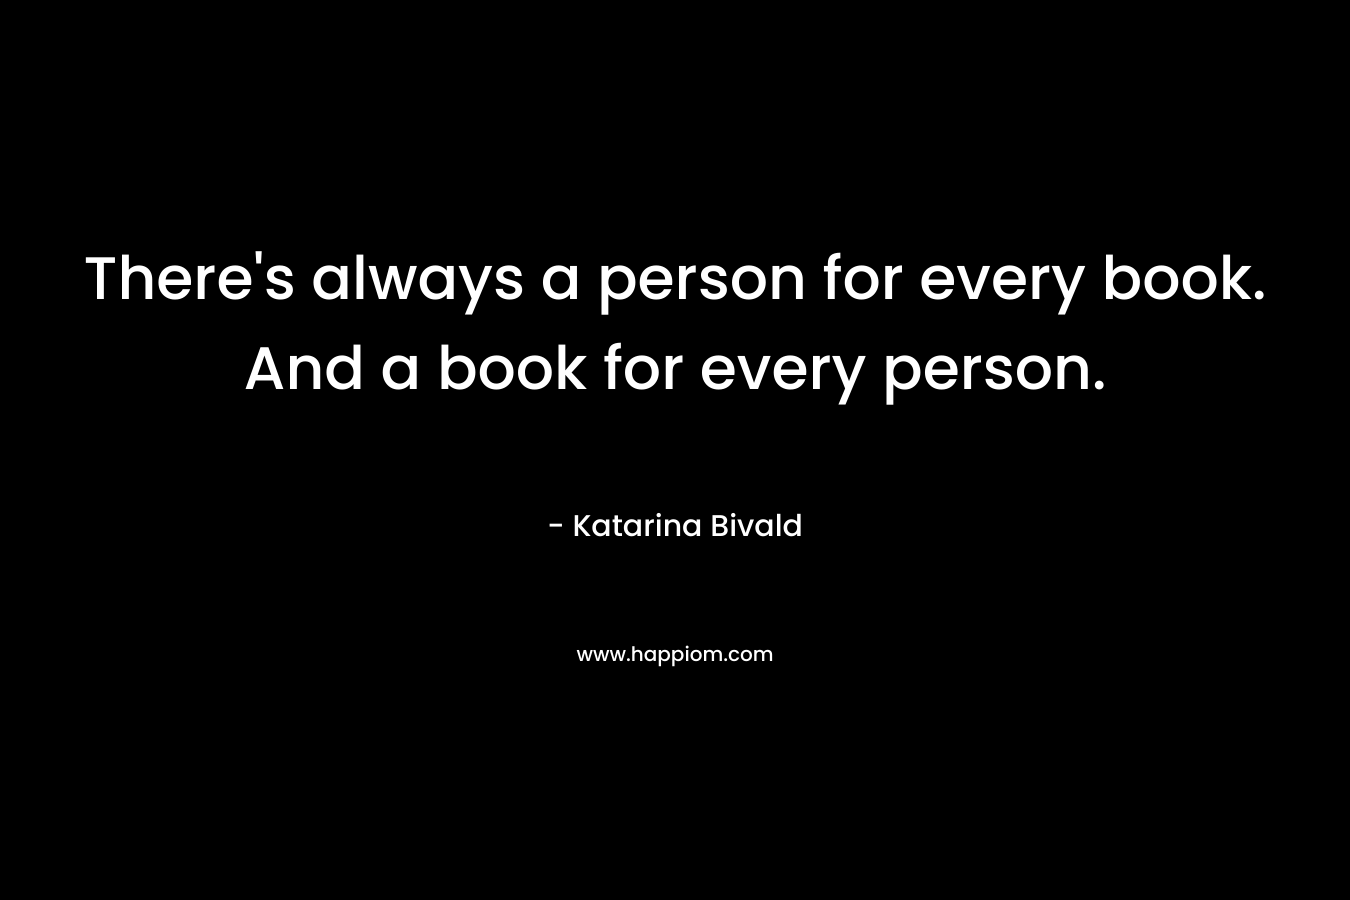 There's always a person for every book. And a book for every person.